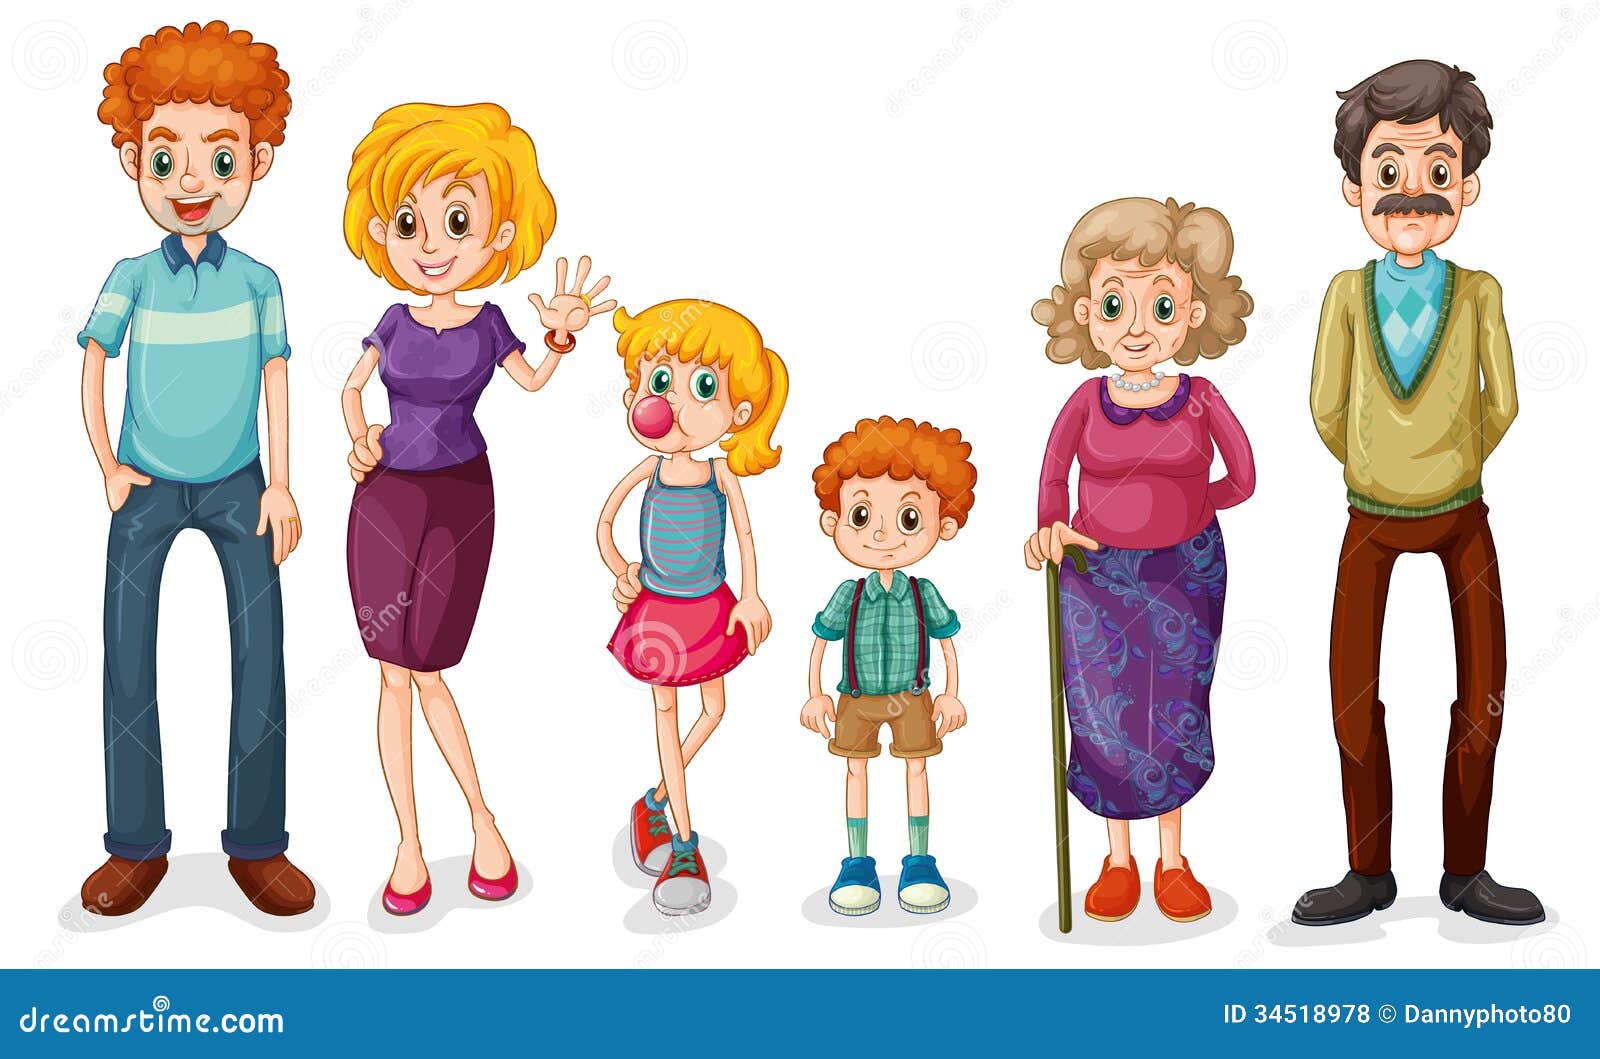 clipart of big family - photo #7